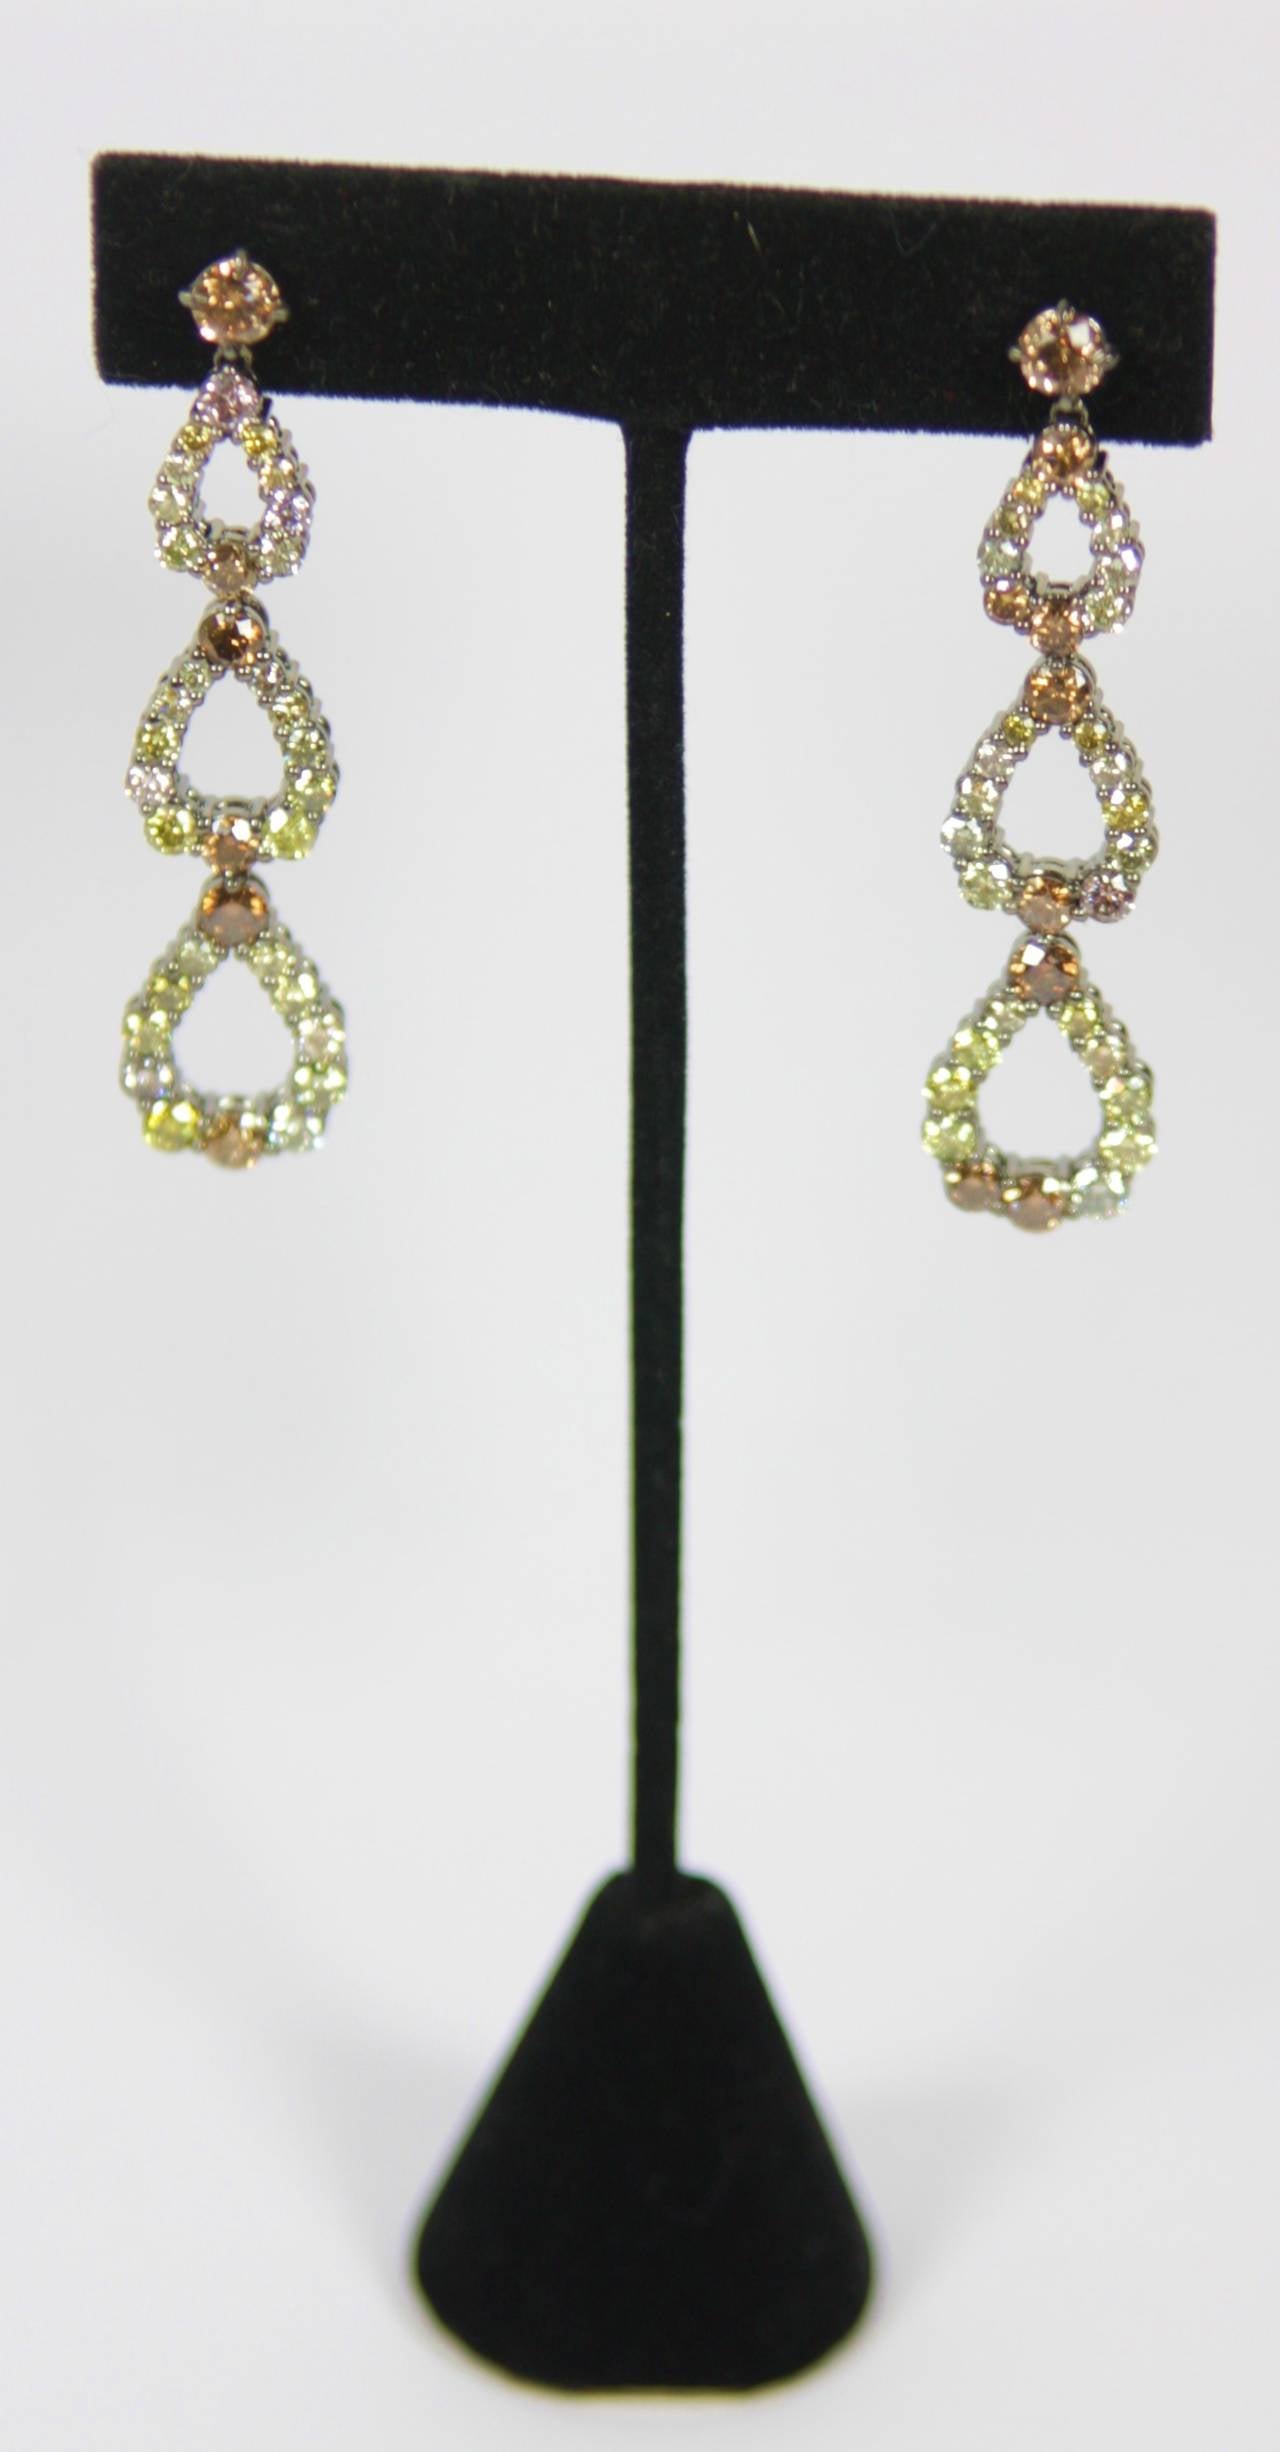 The earrings are composed of  approximately 7.50 carats of fancy diamond round cuts in various colors. The 18kt gold has an added contrast of black rhodium. An absolutely wonderful pair of drop style earrings.

Specs:
18 KT Gold with black